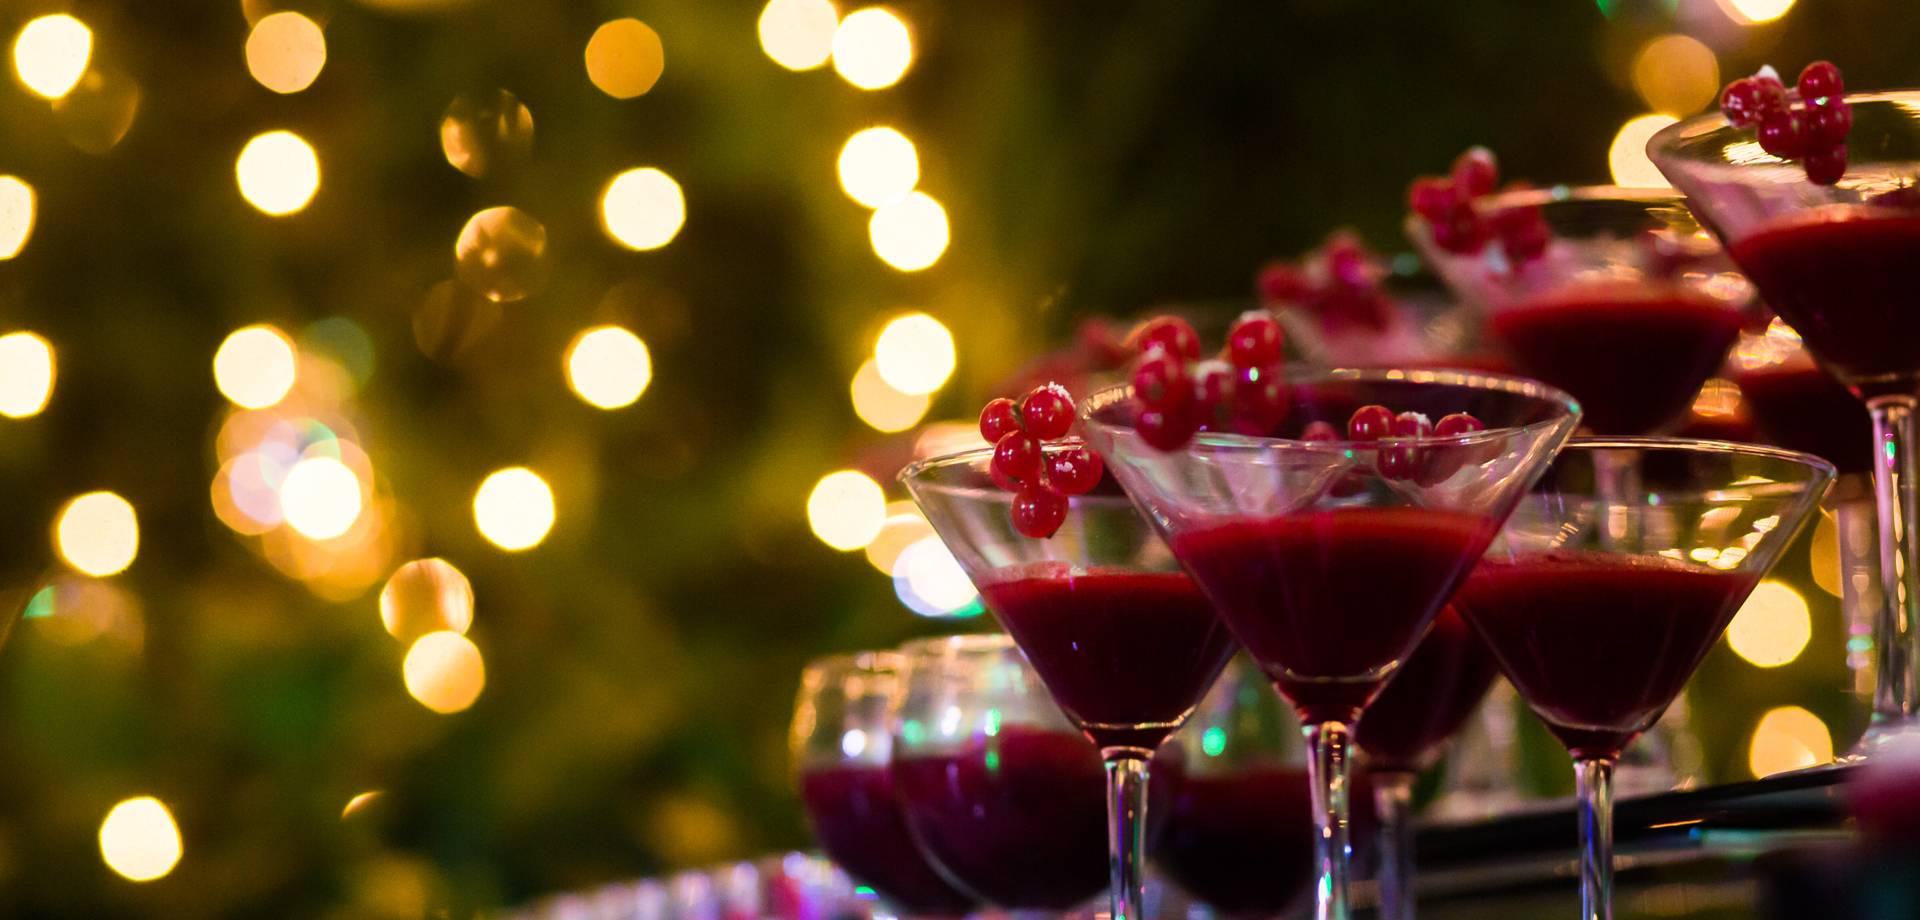 A row of martini glasses containing red drinks are placed along a bar. In the background there are fairy lights.